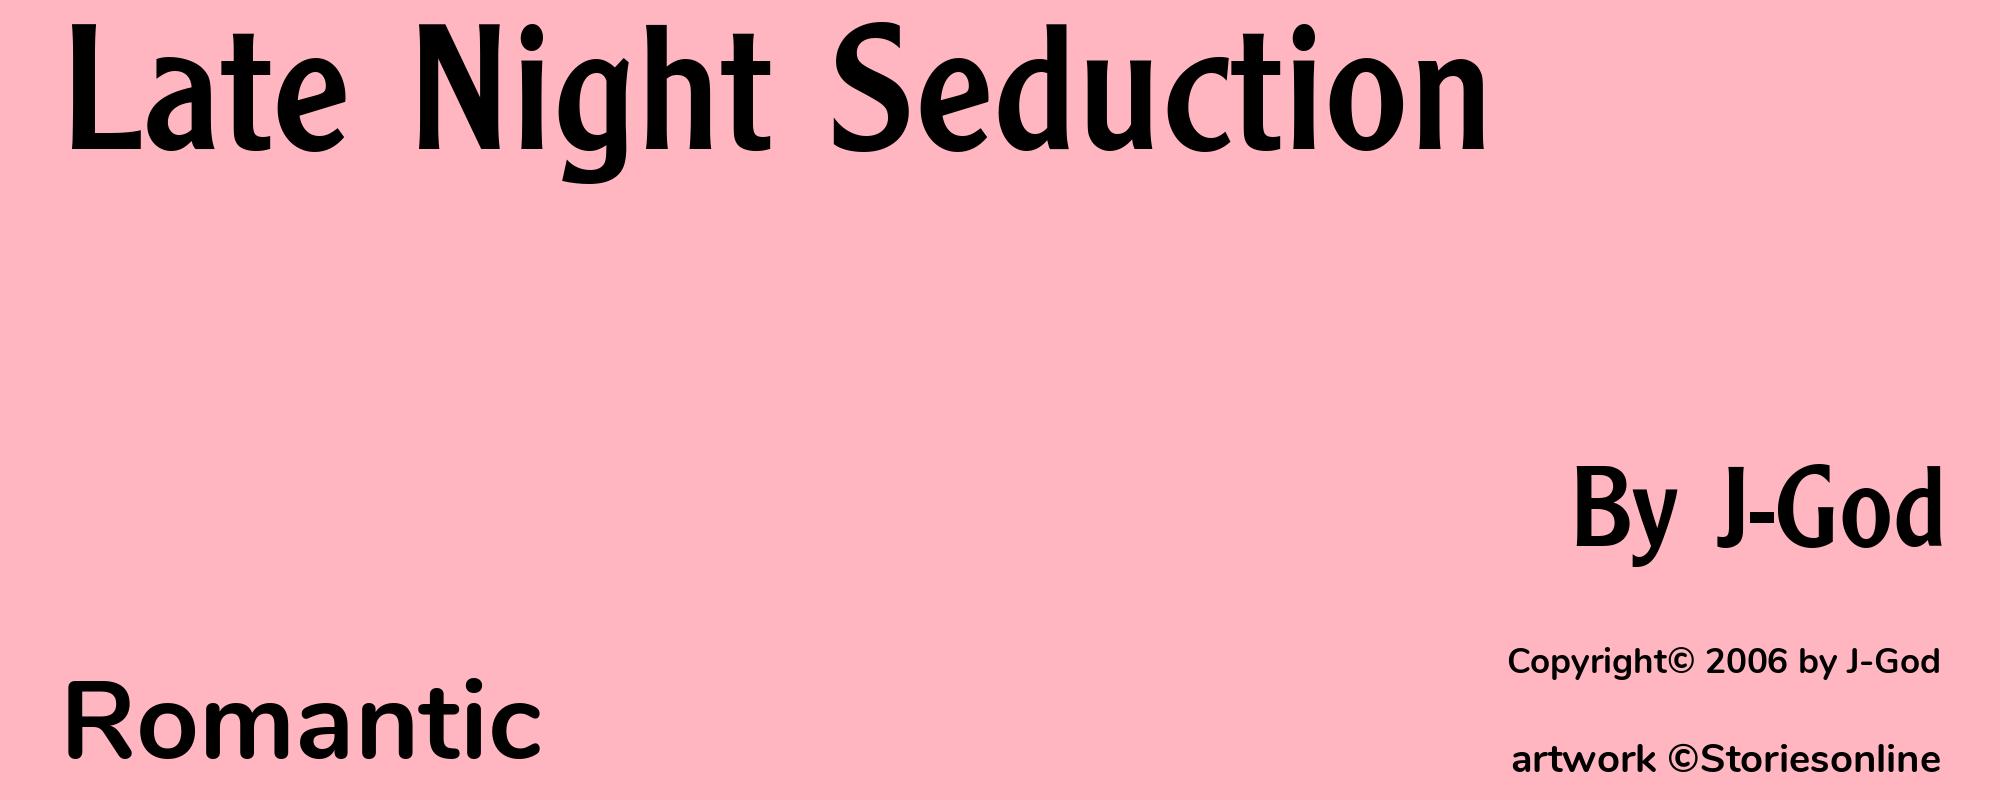 Late Night Seduction - Cover